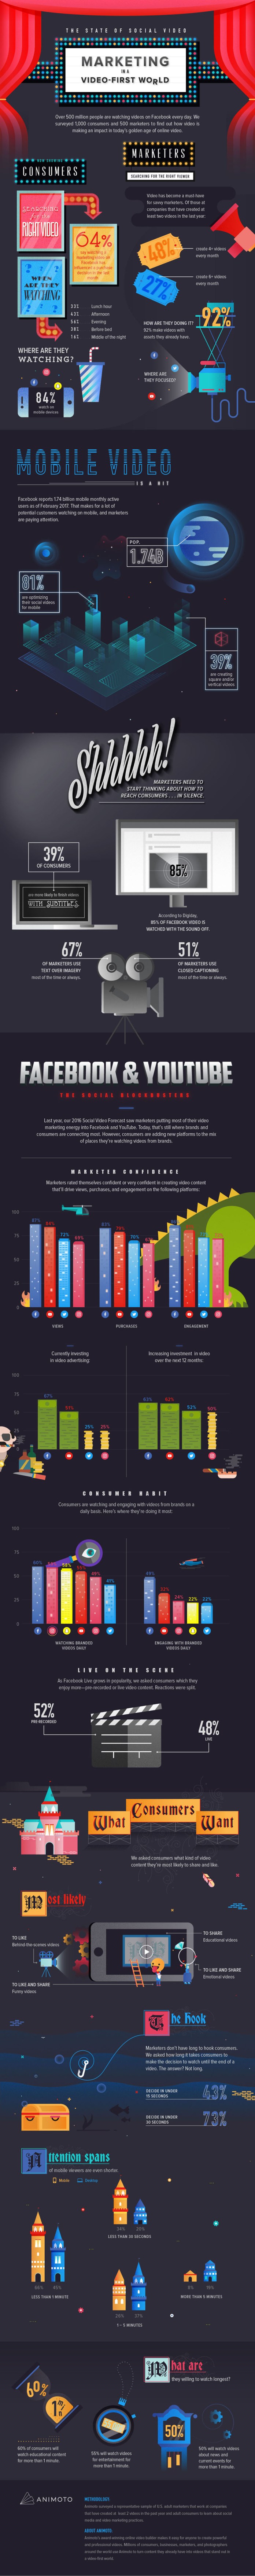 state-of-social-video-infographic